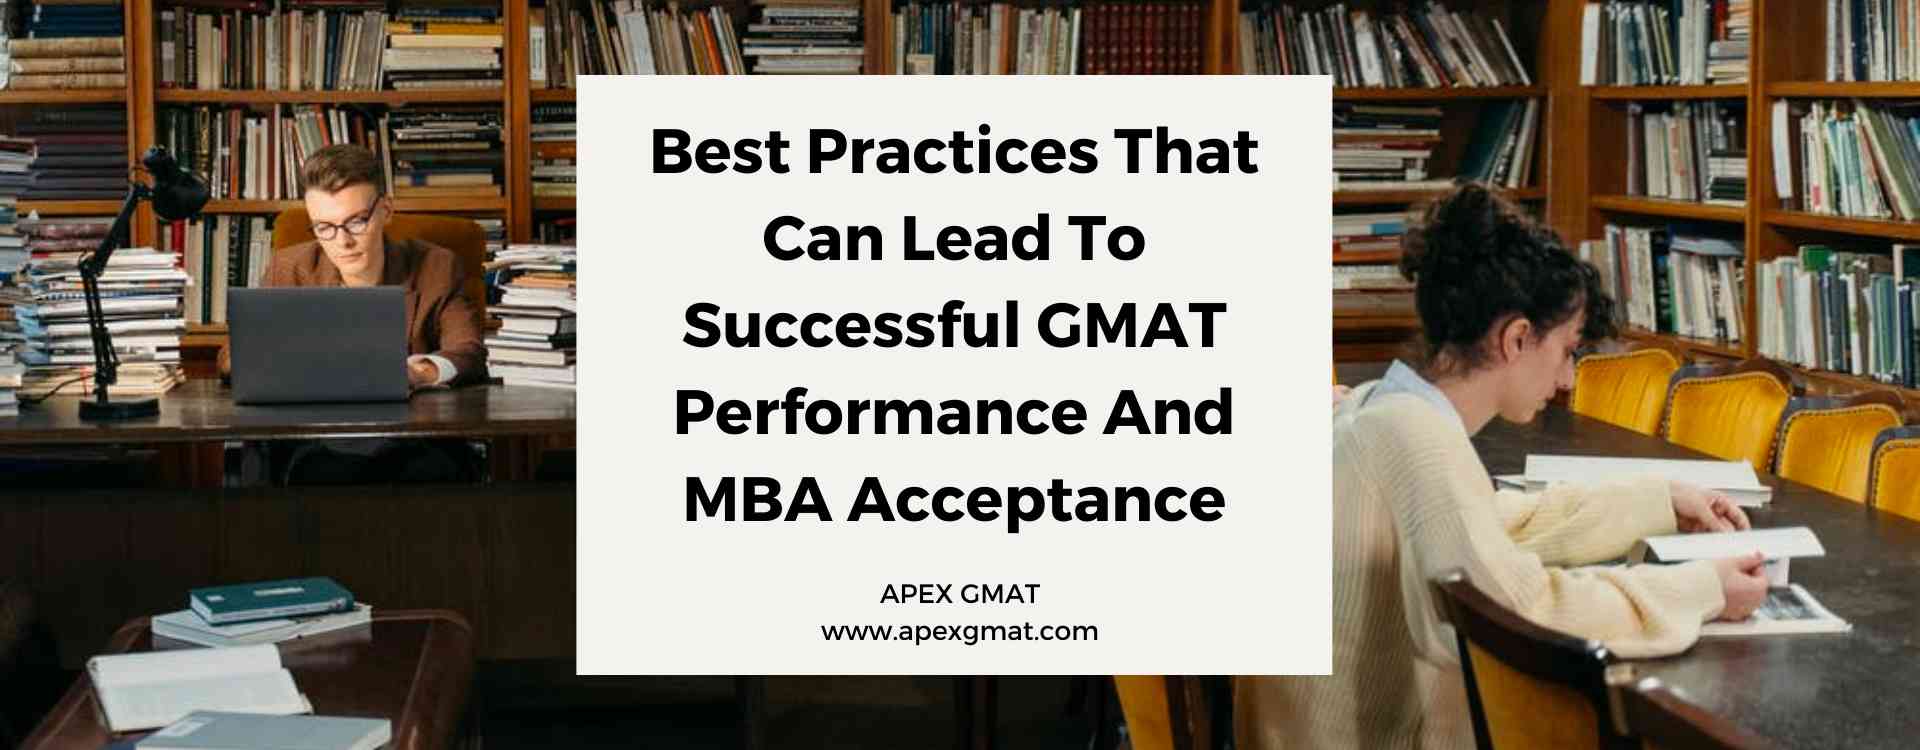 Best Practices That Can Lead To Successful GMAT Performance And MBA Acceptance